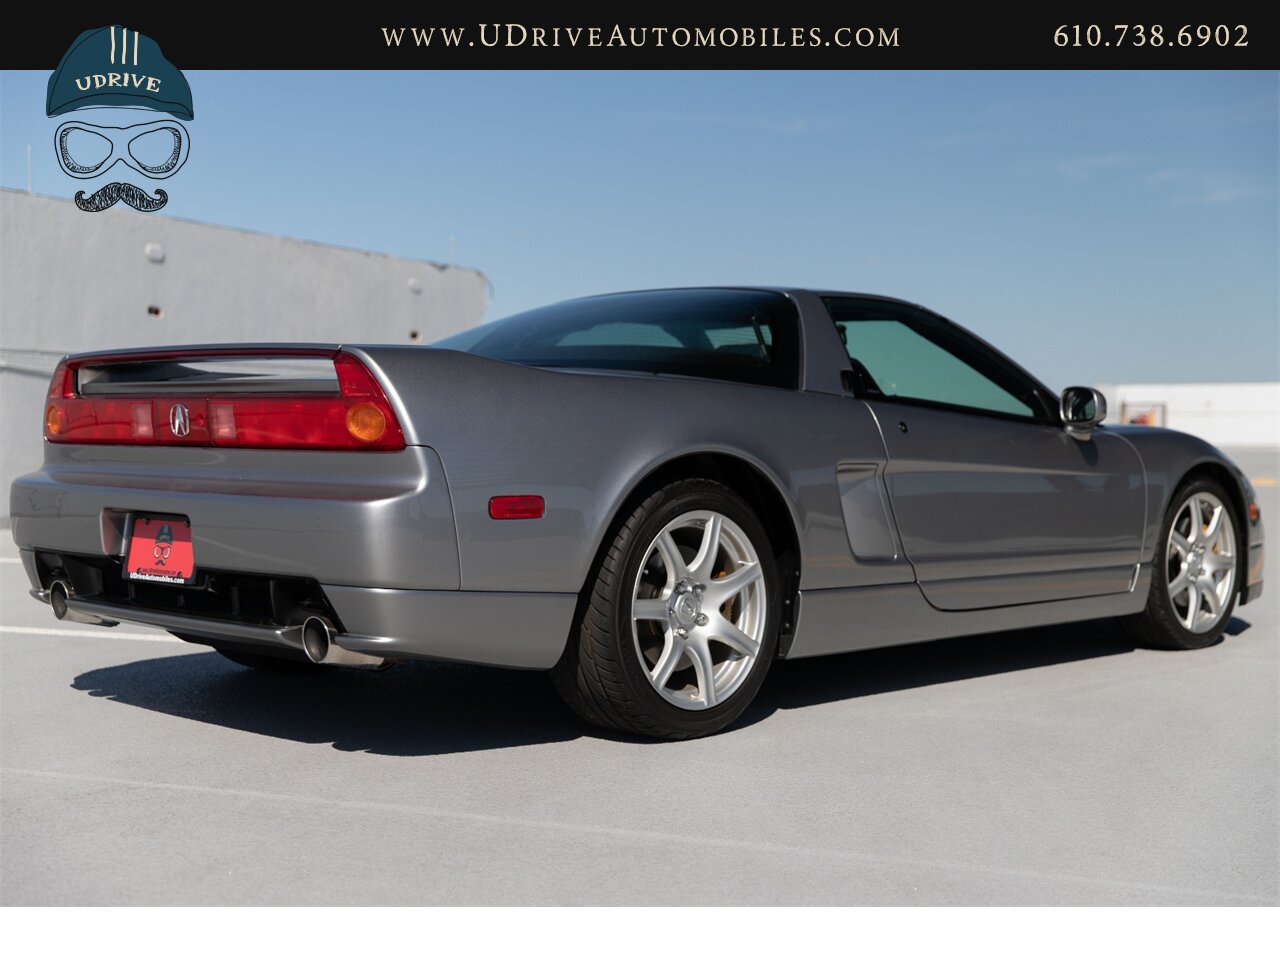 2002 Acura NSX NSX-T 9k Miles 6 Speed Manual Service History  Collector Grade - Photo 19 - West Chester, PA 19382